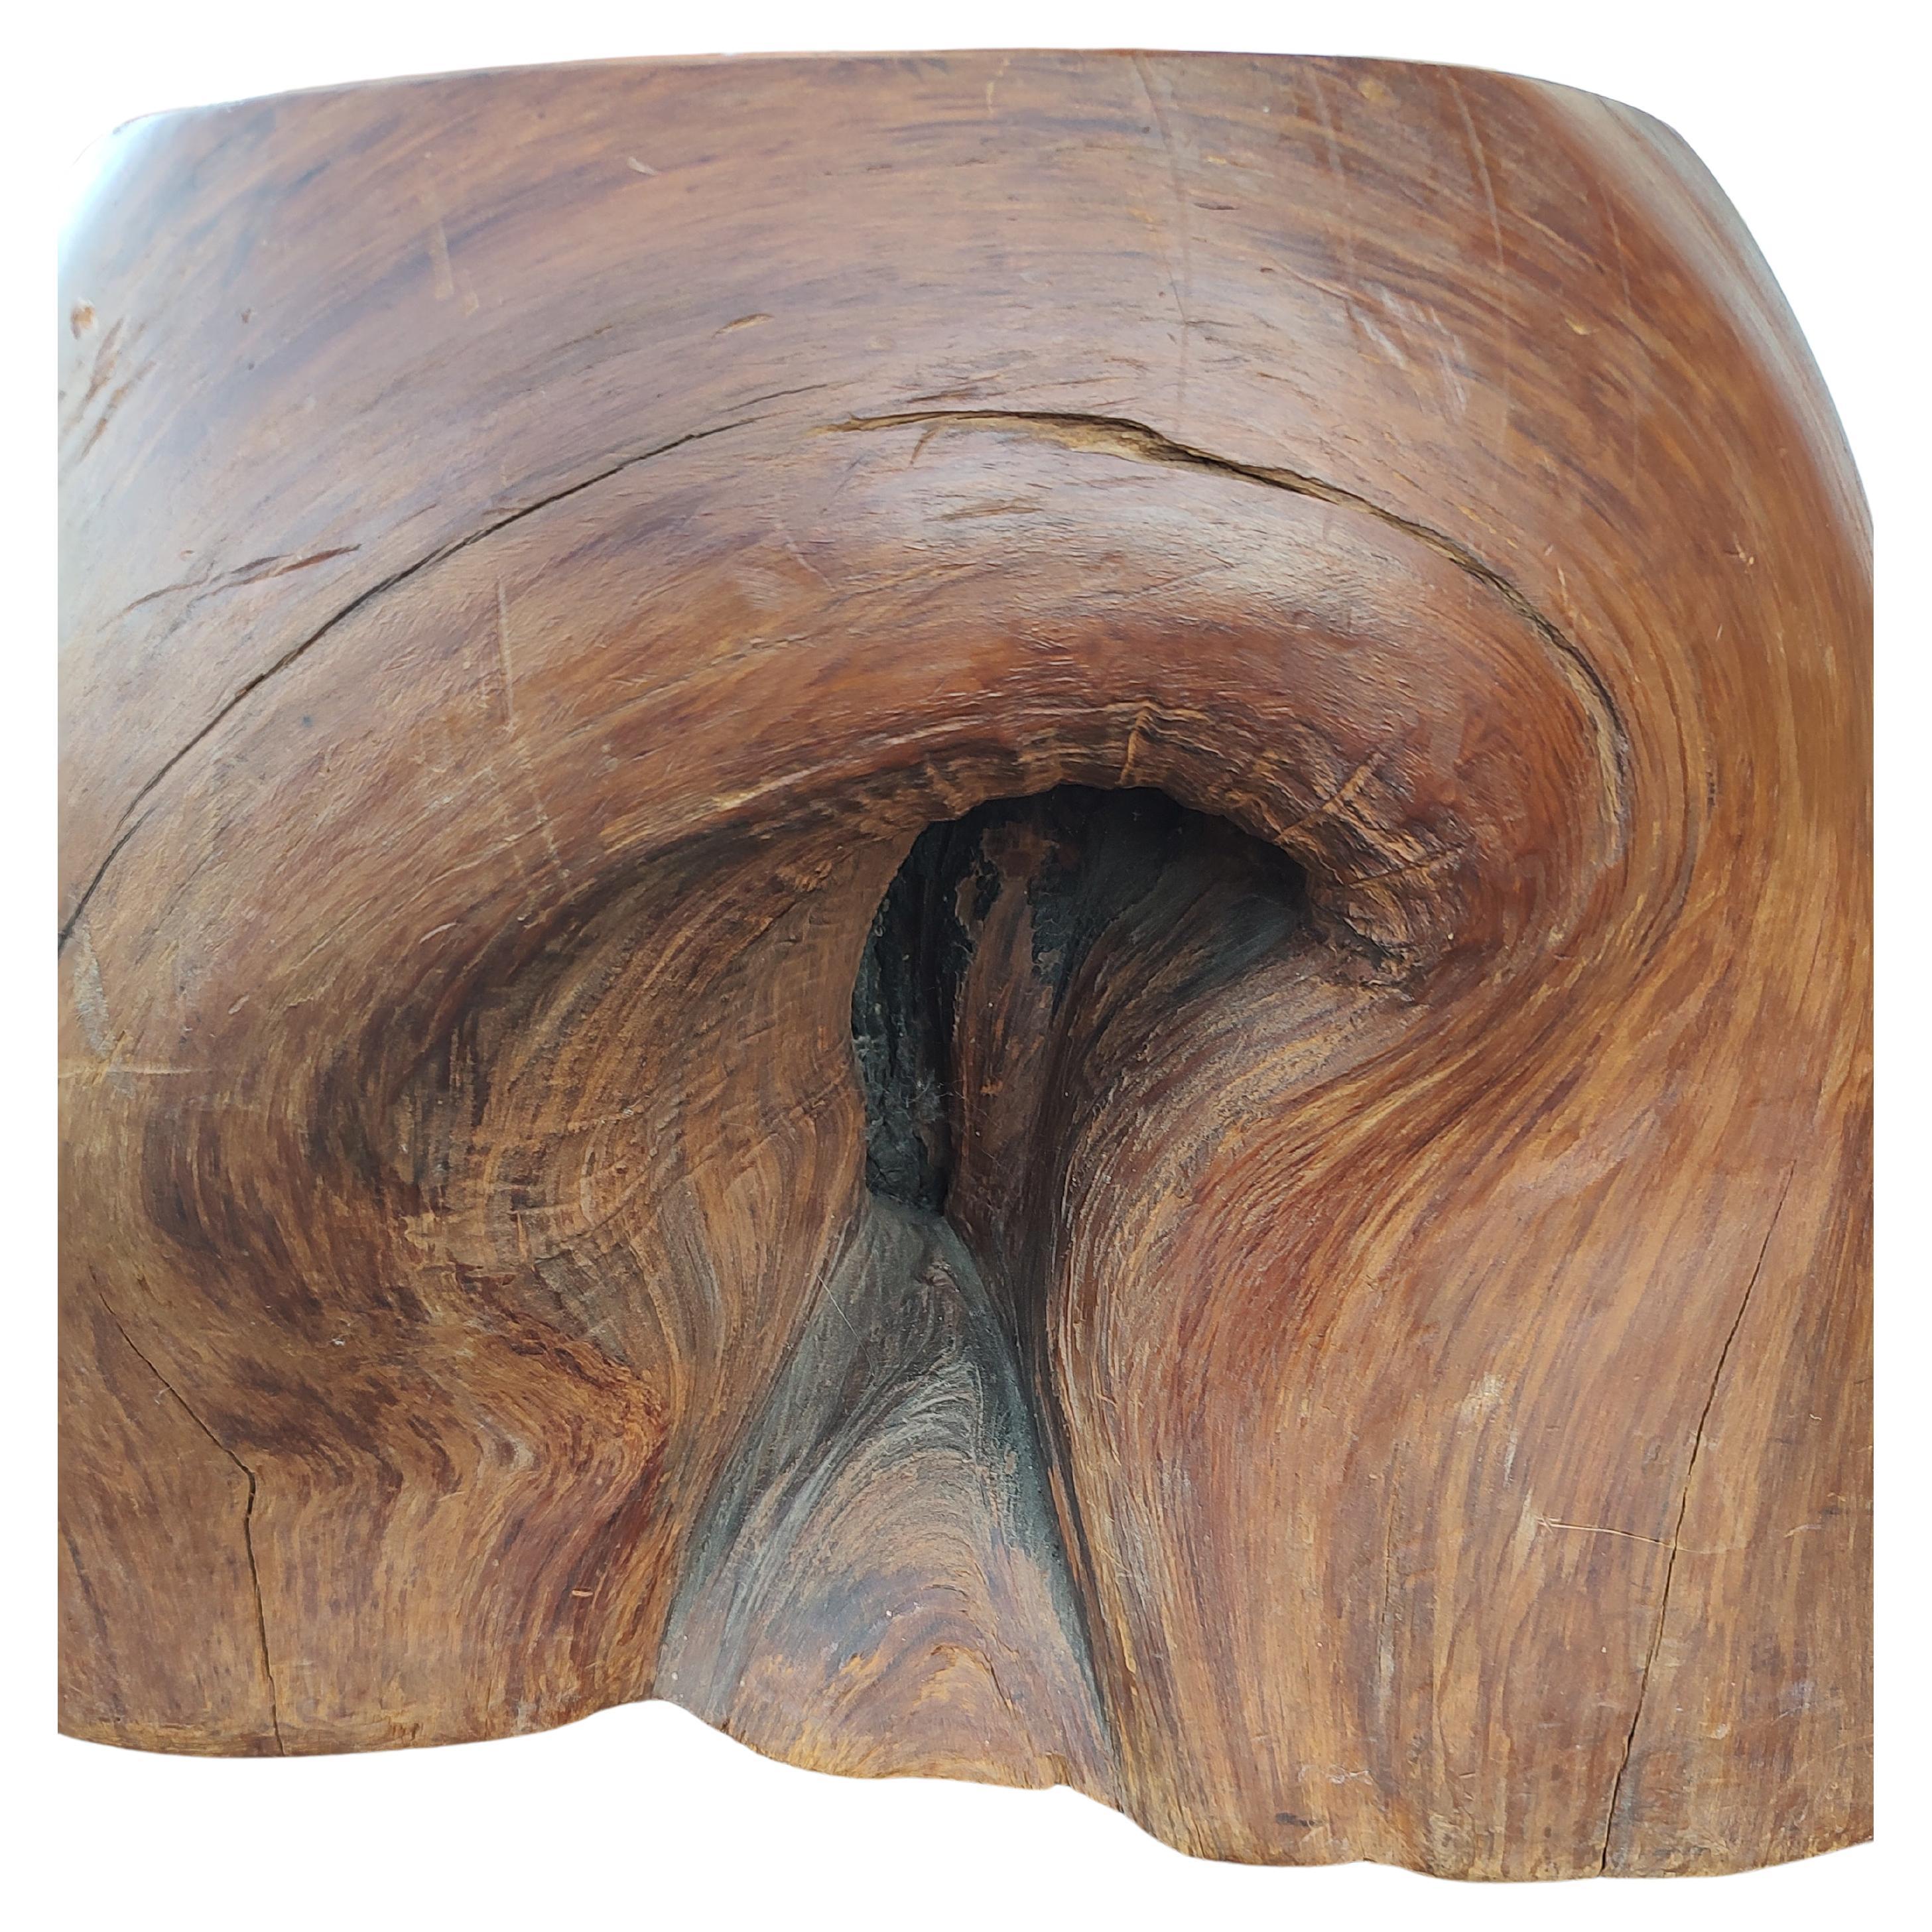 Fabulous and large Sculptural section of Redwood from California. Flat top measures 20 x 16, while the base is 24 x 24 with a height of 16. Piece of glass either round or square can be placed on top to further enhance the use and size. In excellent